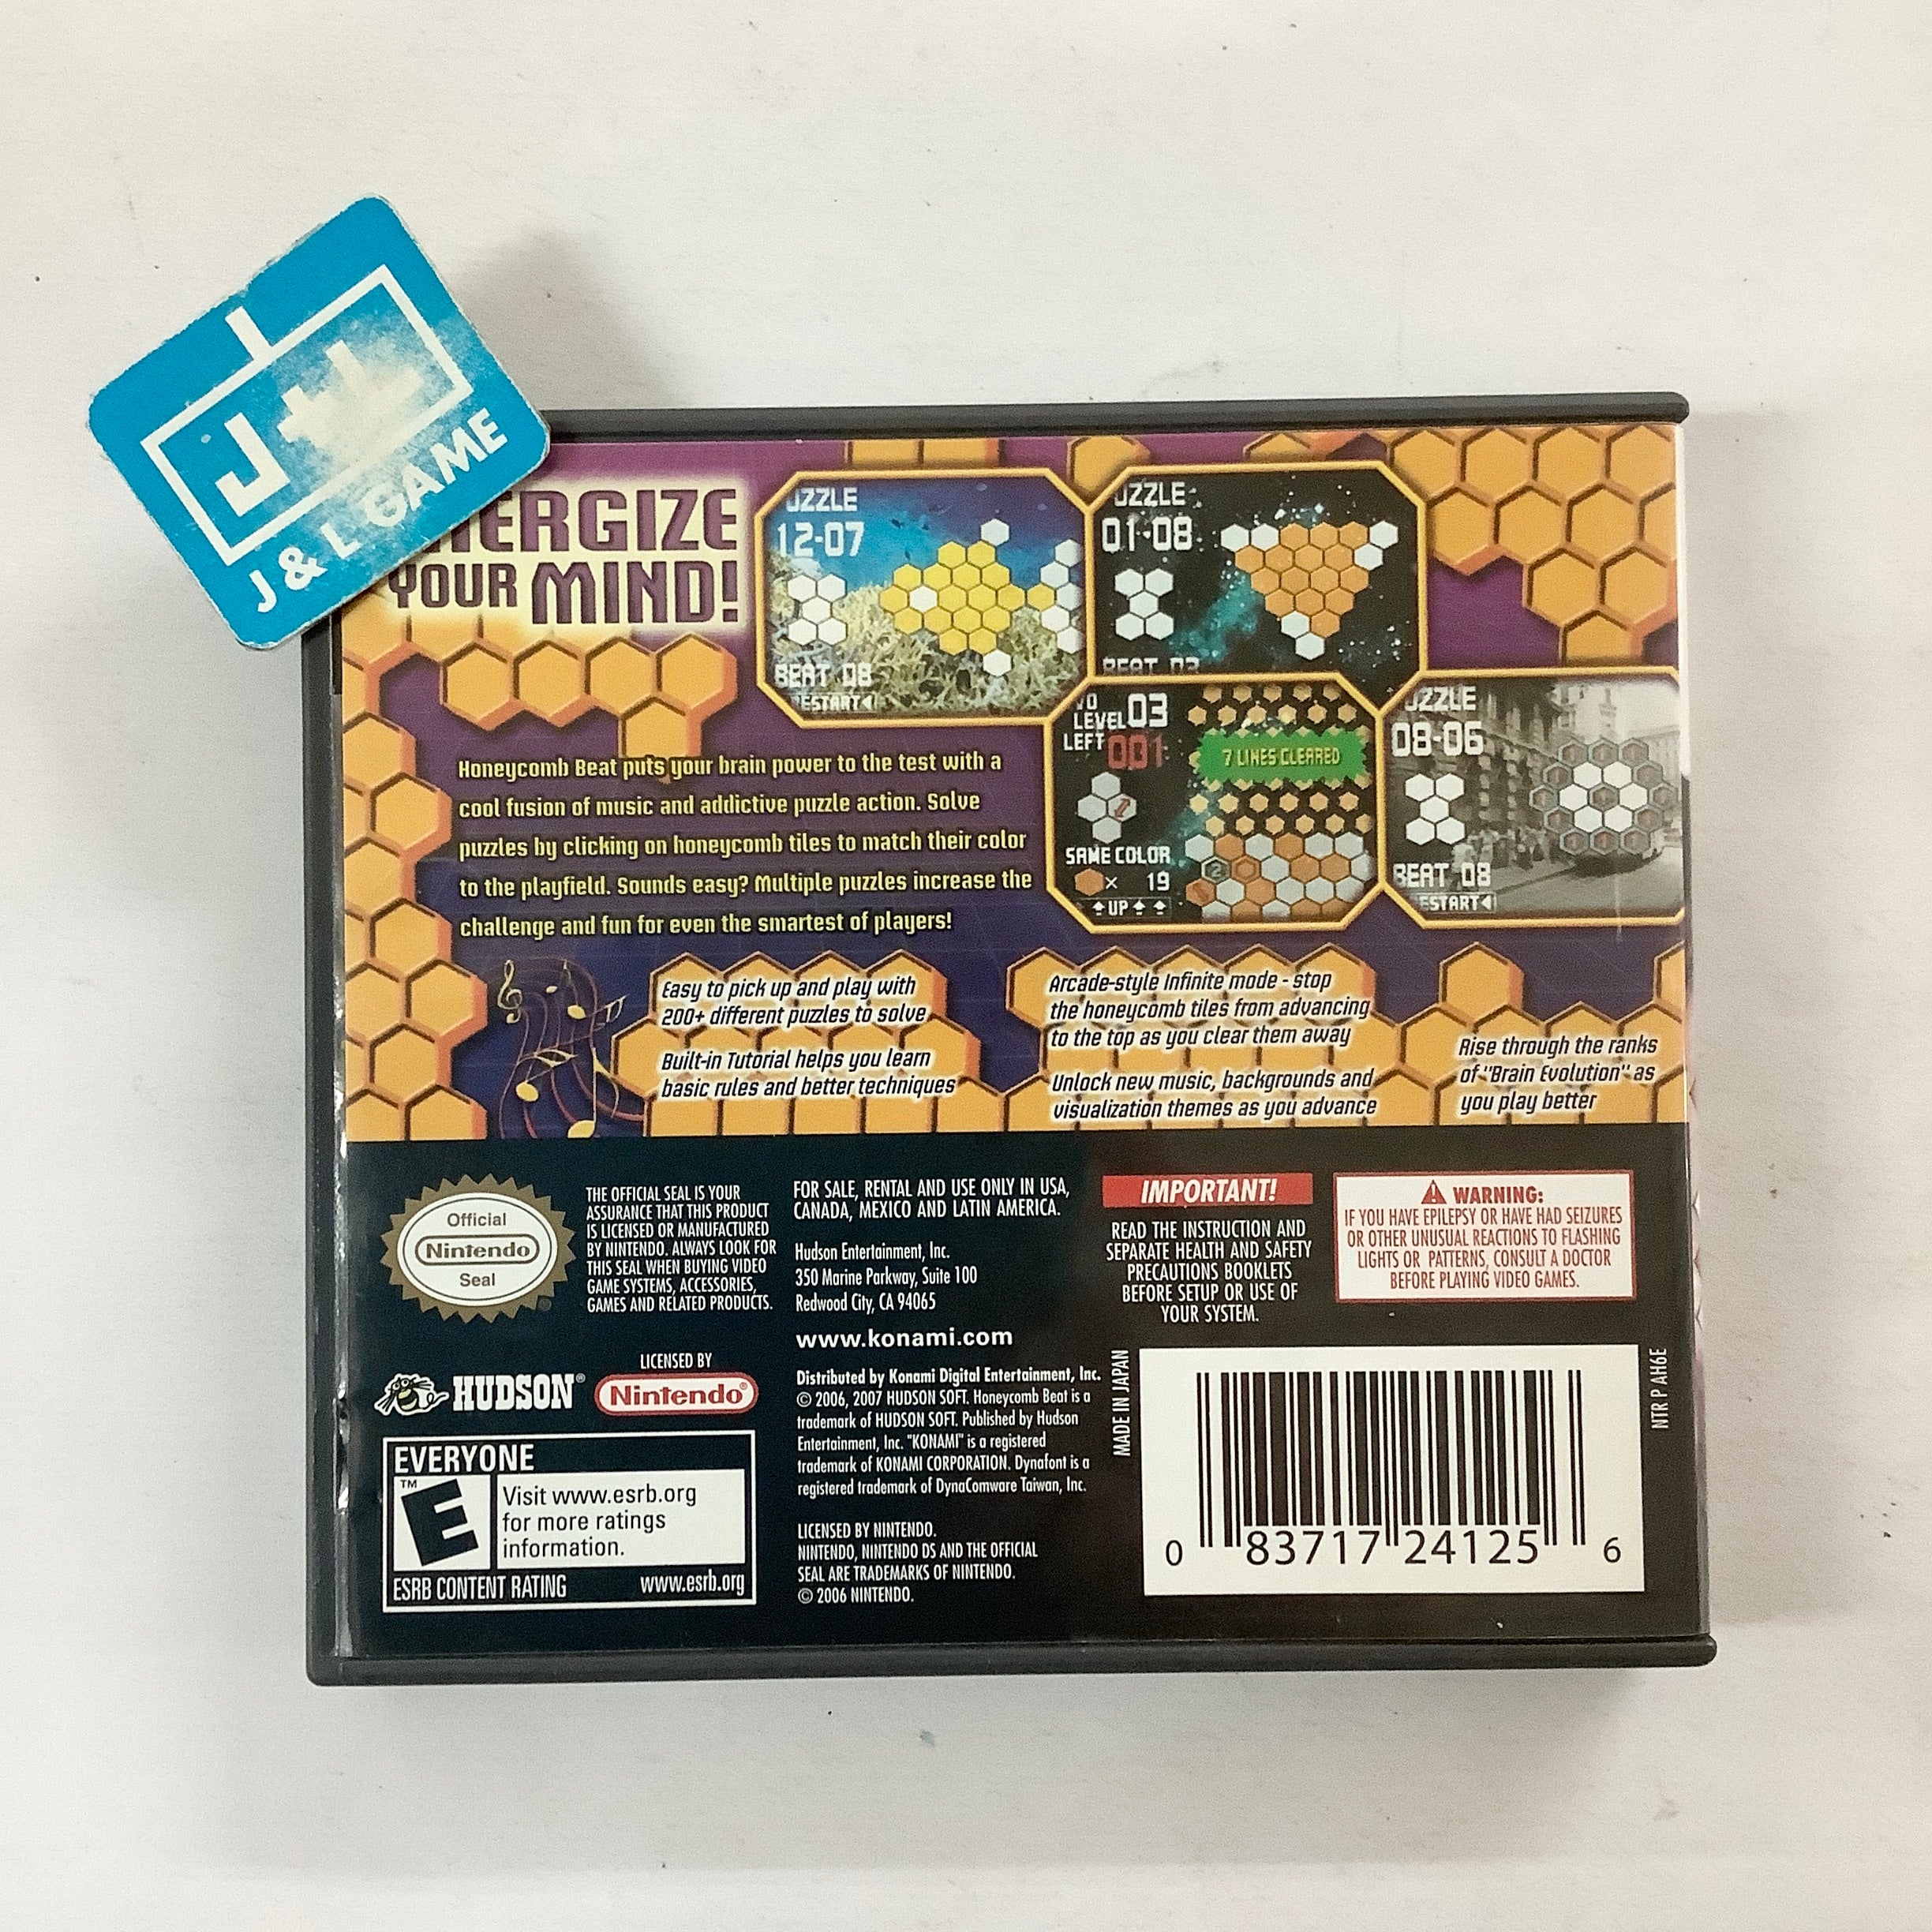 Honeycomb Beat - (NDS) Nintendo DS [Pre-Owned] Video Games Hudson   